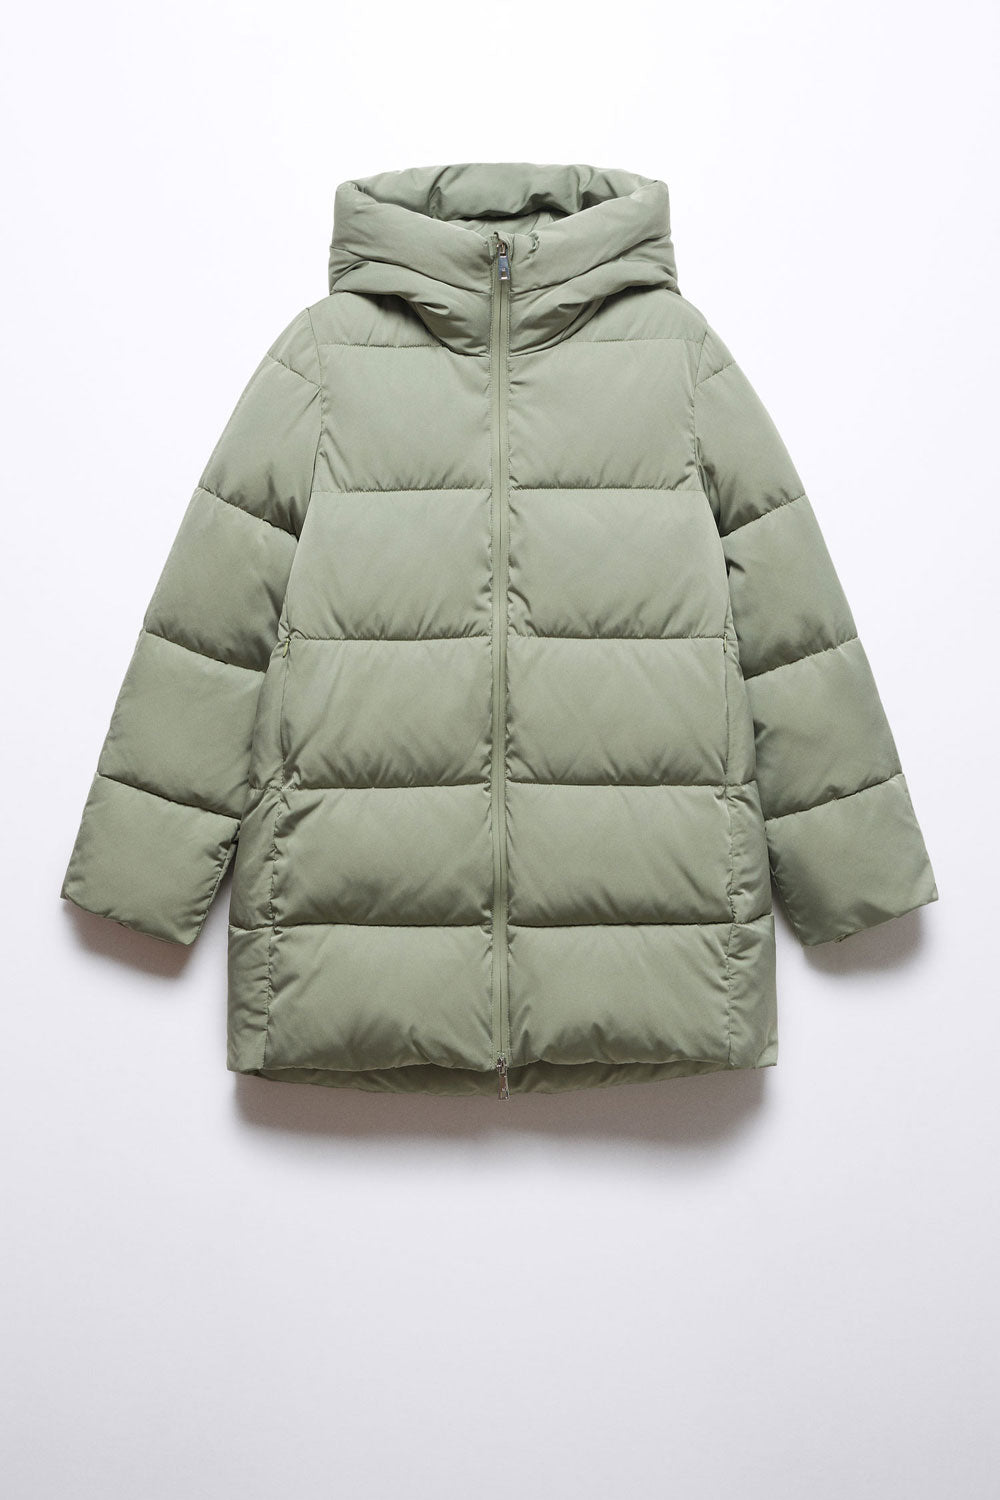 Mango Hood quilted puffer coat 3 Shaws Department Stores